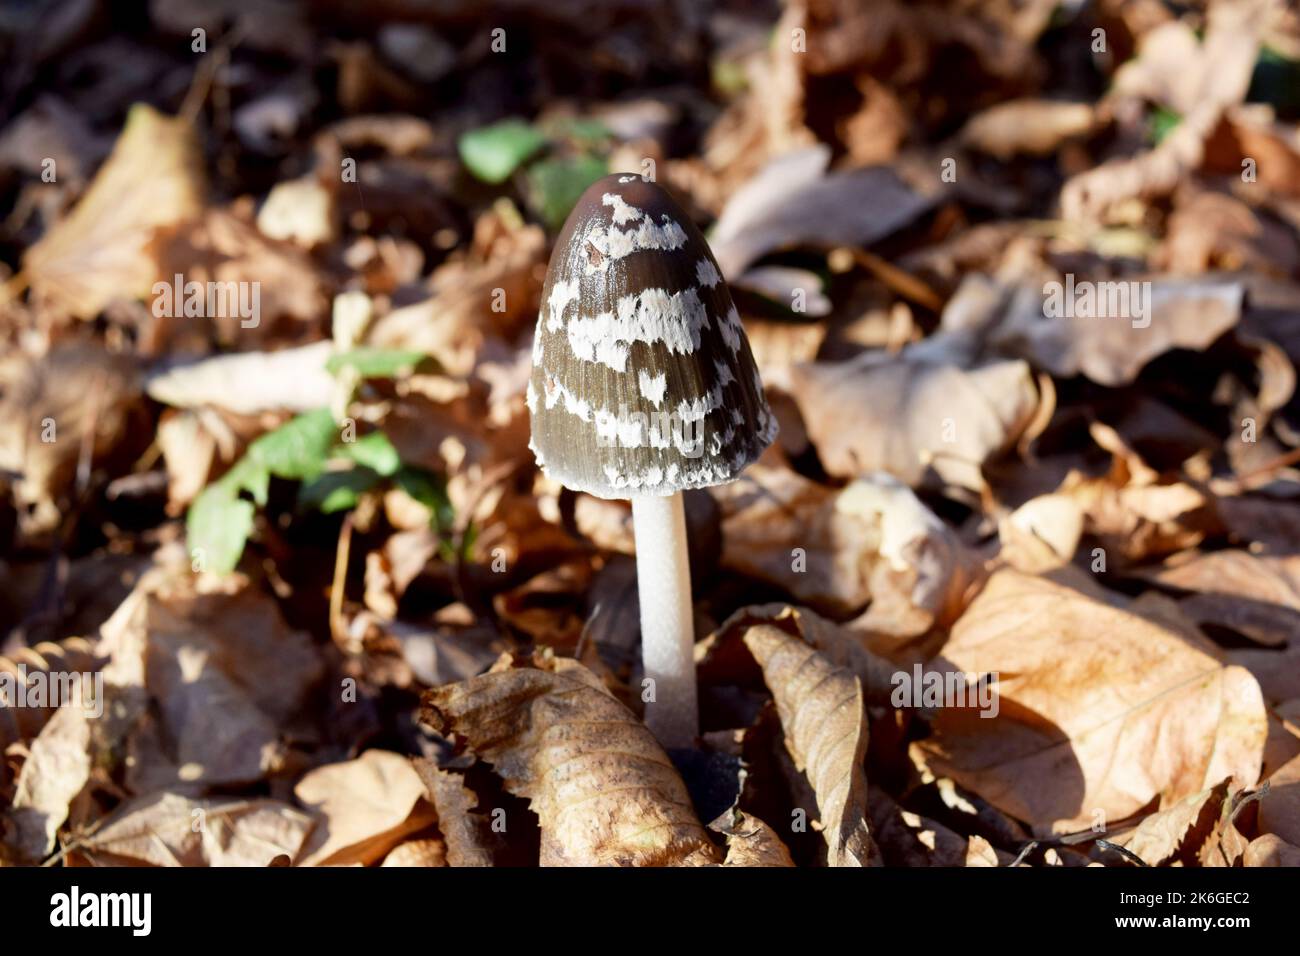 Close up photo of a wild mushroom in the forest named Magpie inkcap fungus. The cap is egg-shaped, later it opens up and takes on a bell shape. Stock Photo